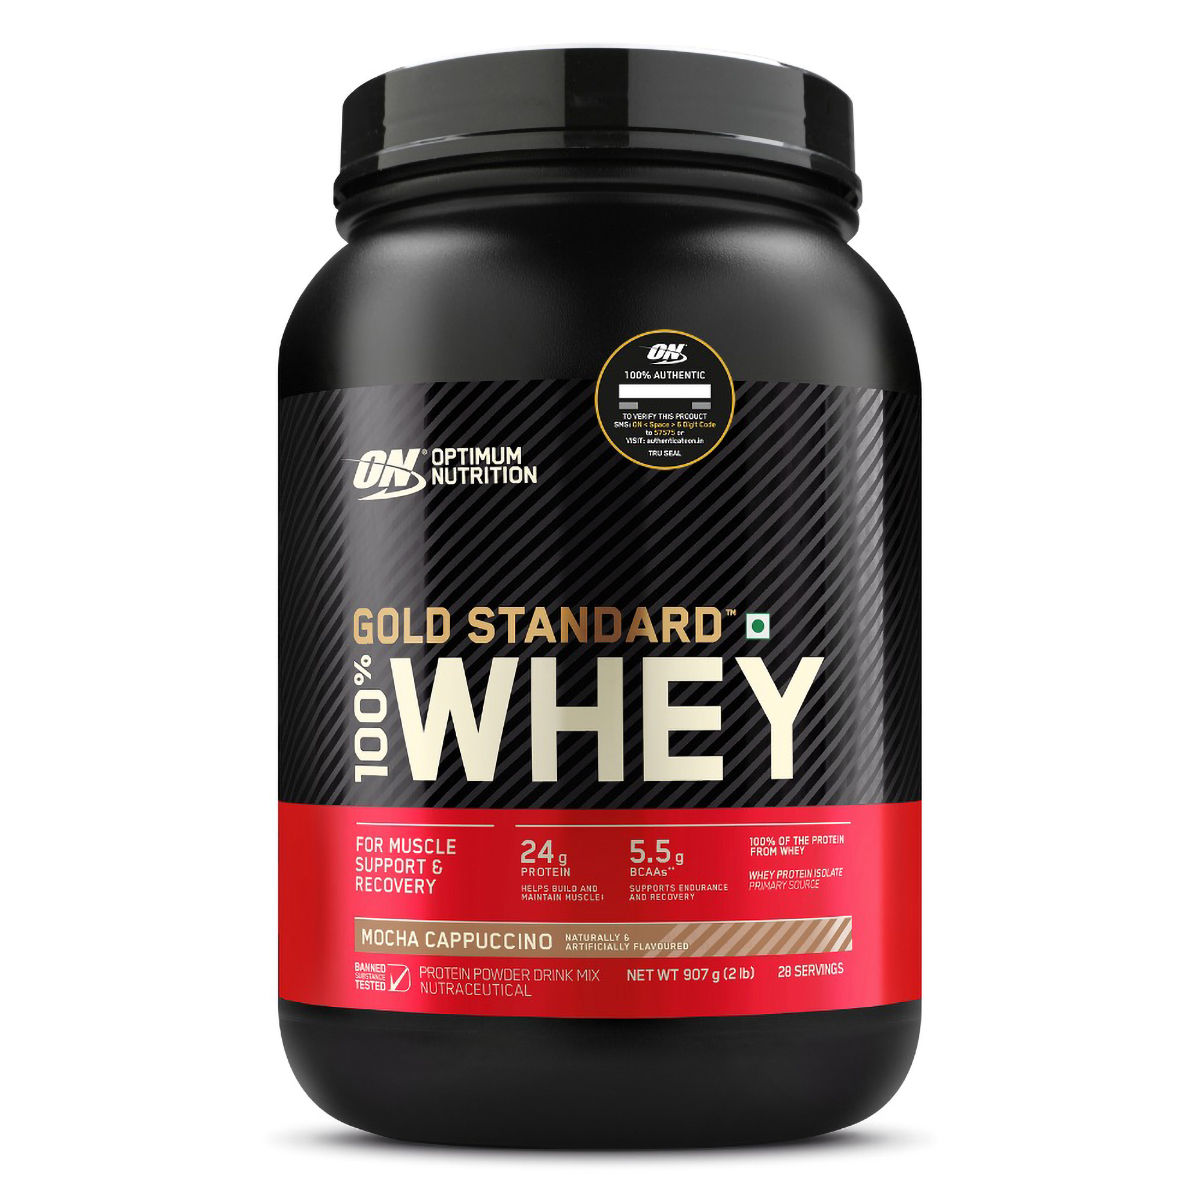 Buy Optimum Nutrition (ON) Gold Standard 100% Whey Protein Mocha Cappuccino Flavour Powder, 2 lb Online